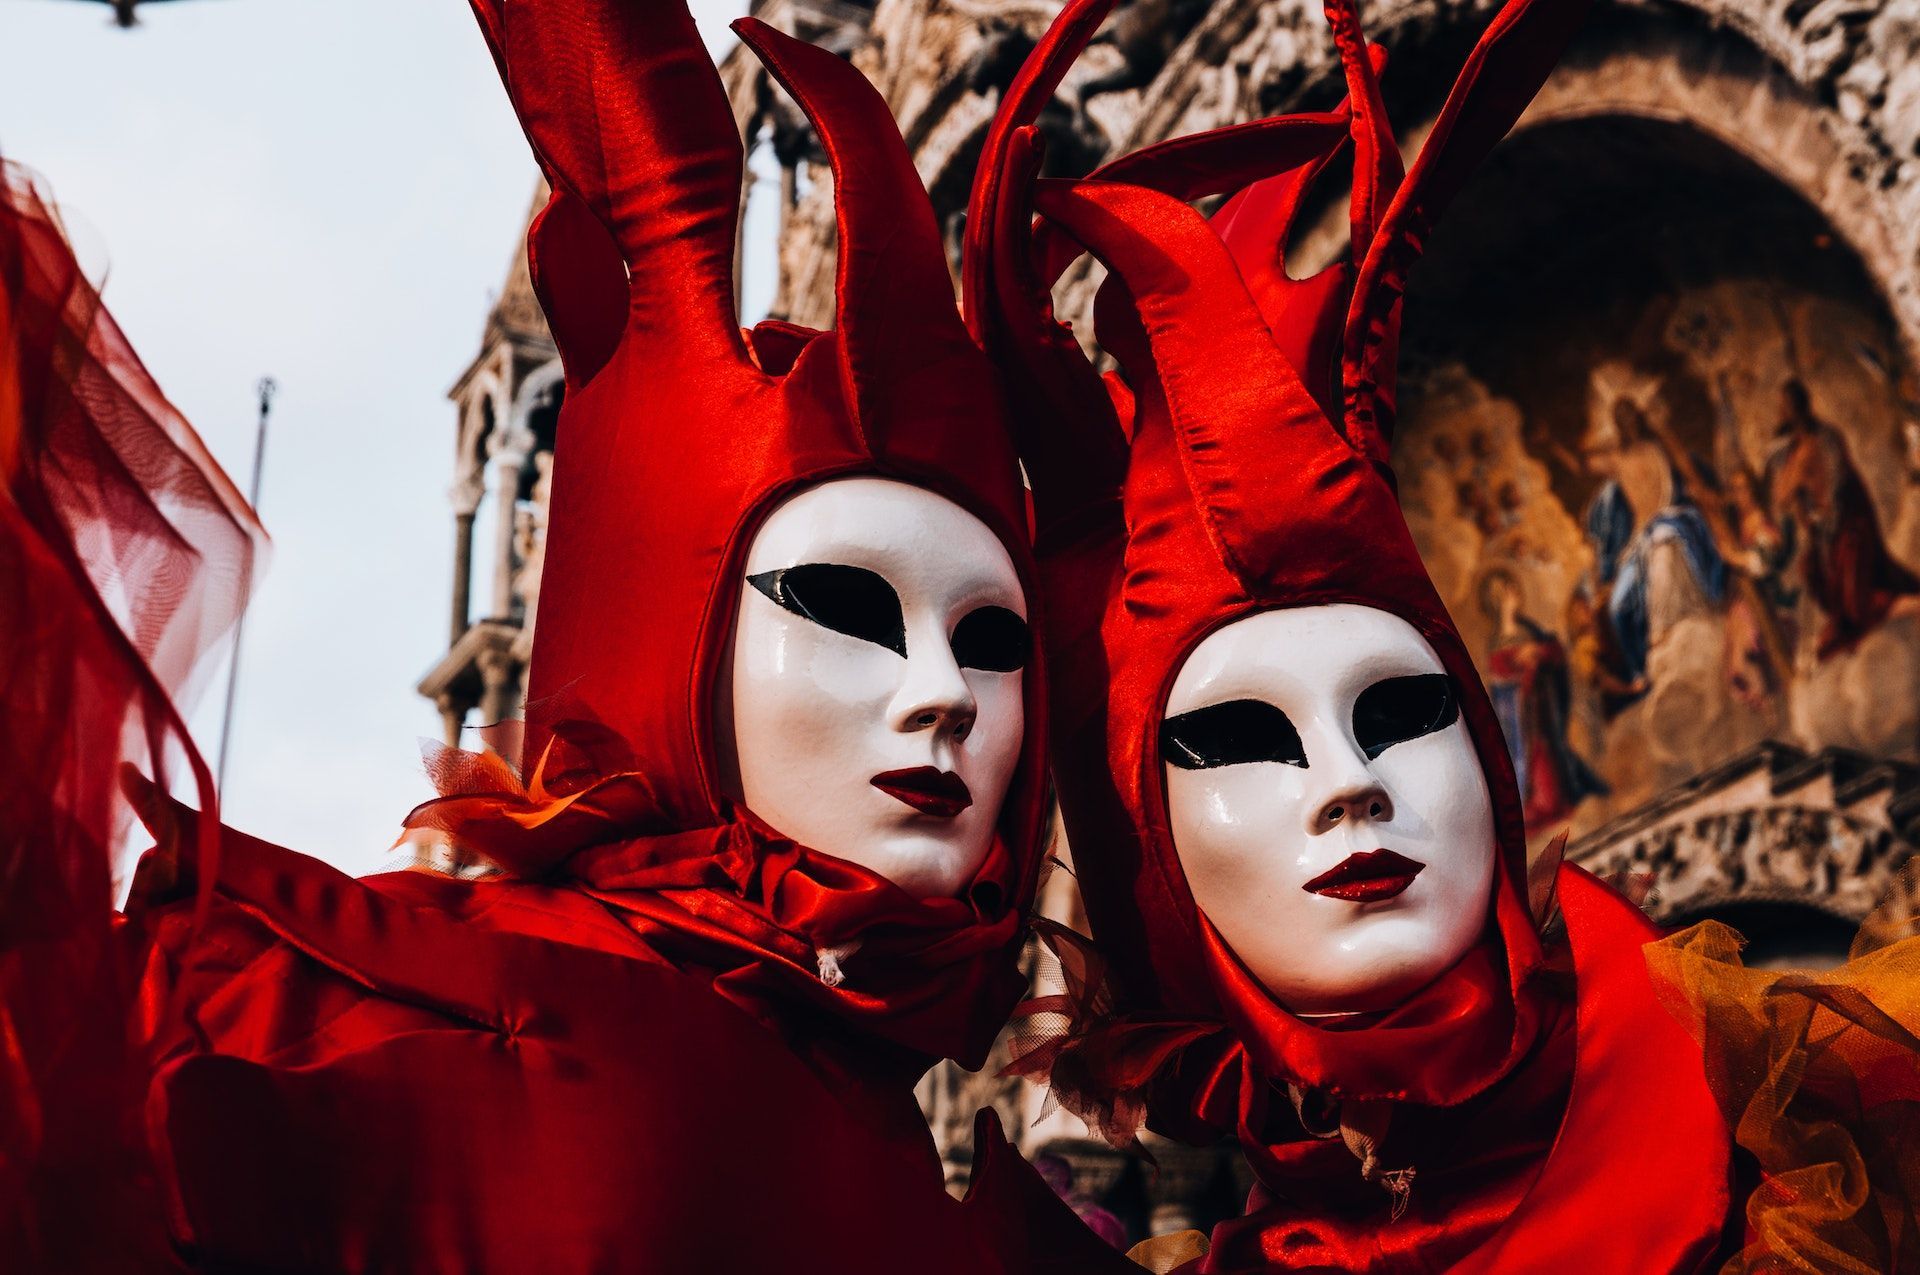 A pair of figures at a carnival, wearing elaborate red costumes and unsettling, almost featureless white masks